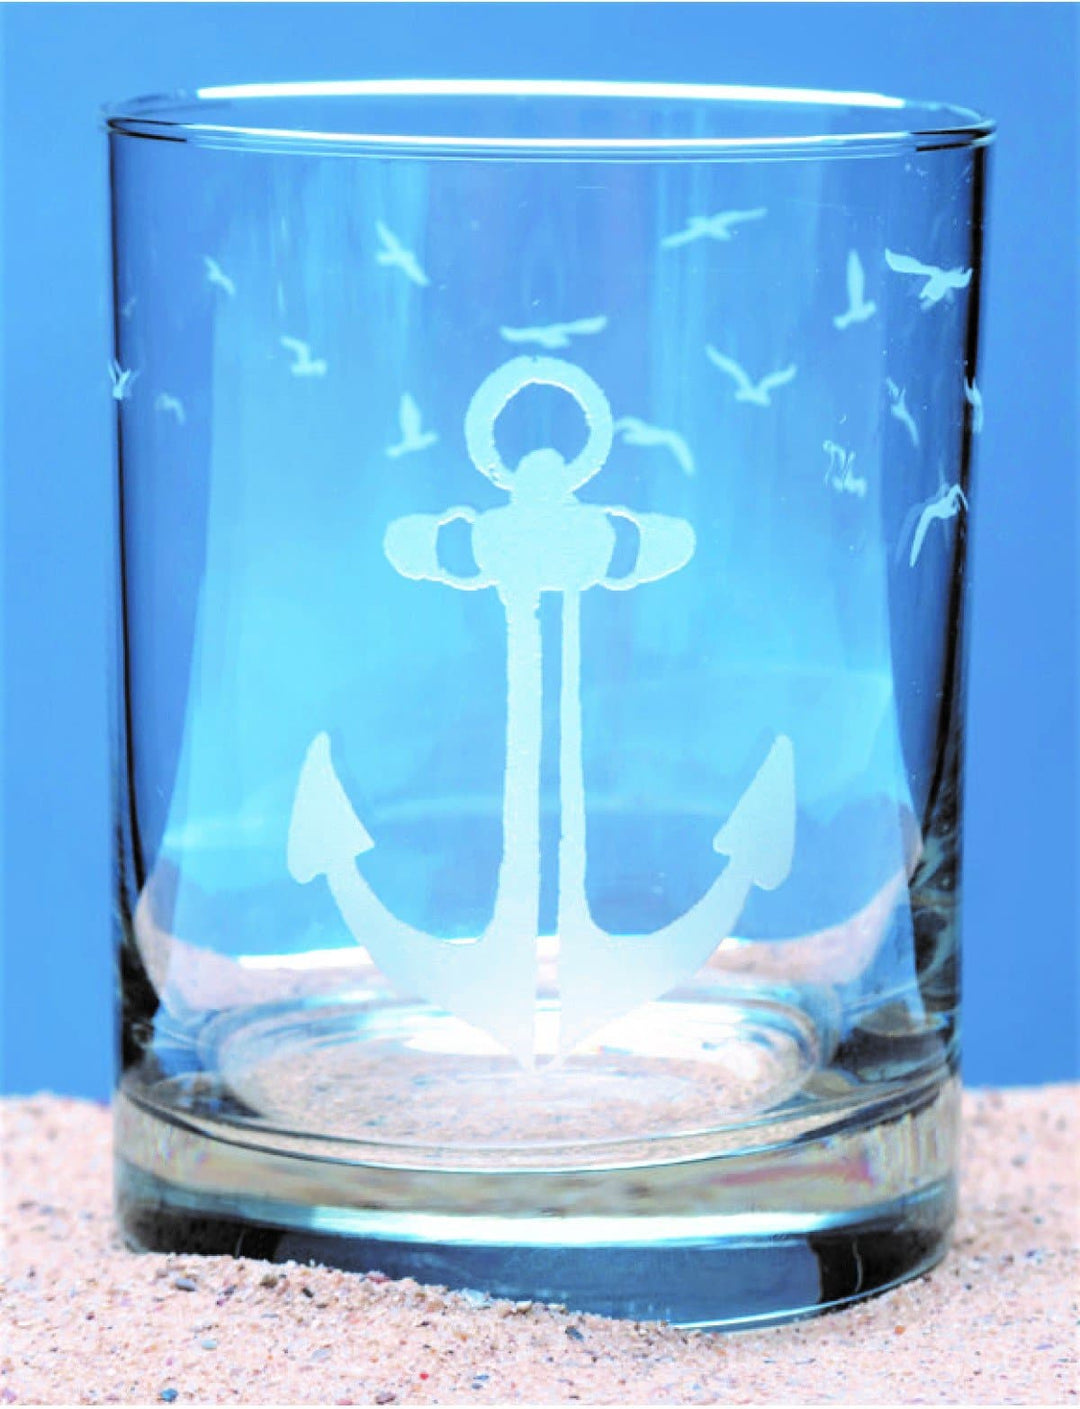 Coastal anchor printed double old fashioned glasses. Made in the USA. Your Western Decor